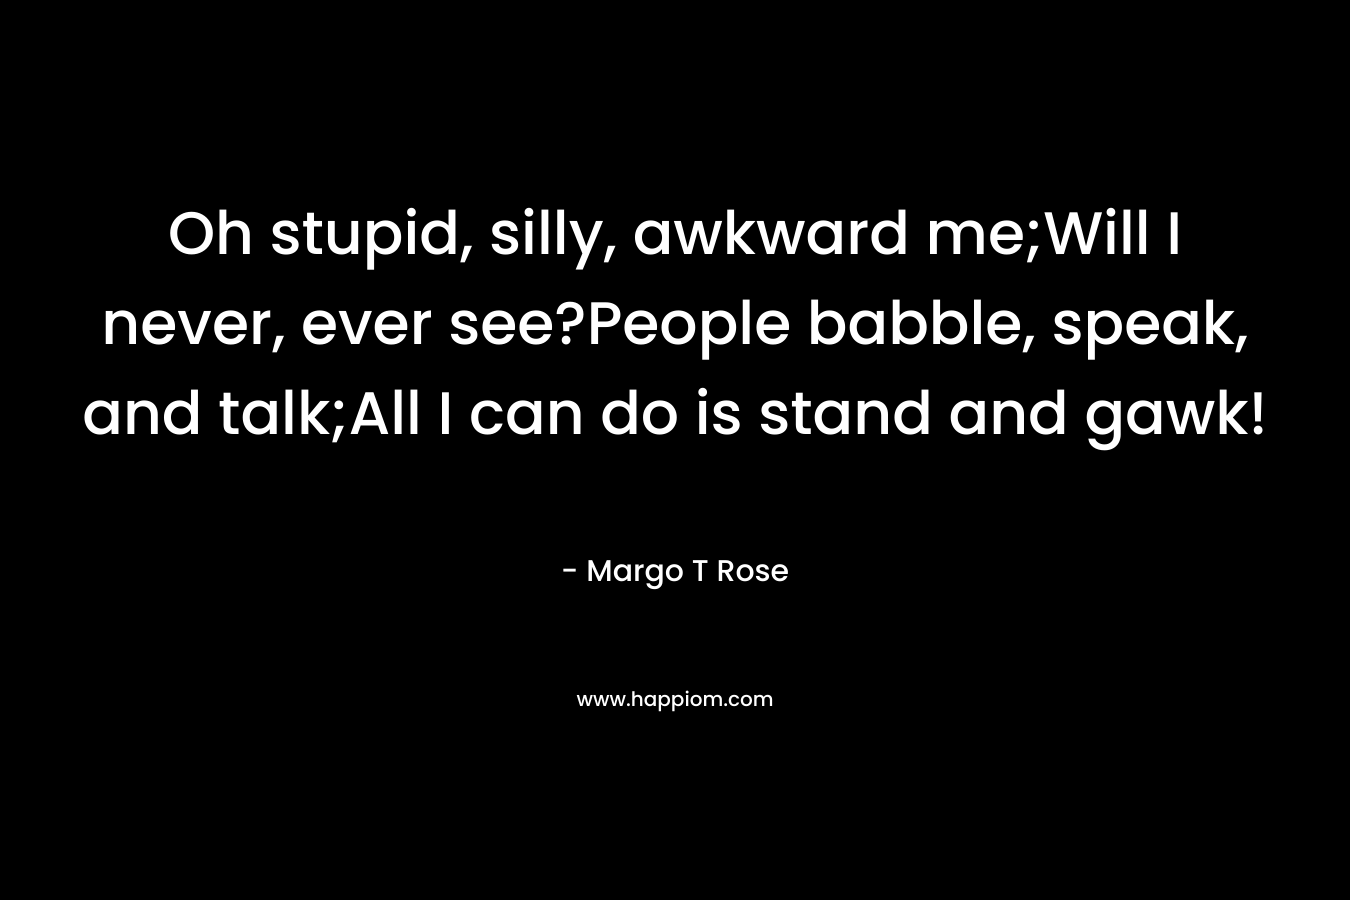 Oh stupid, silly, awkward me;Will I never, ever see?People babble, speak, and talk;All I can do is stand and gawk! – Margo T Rose